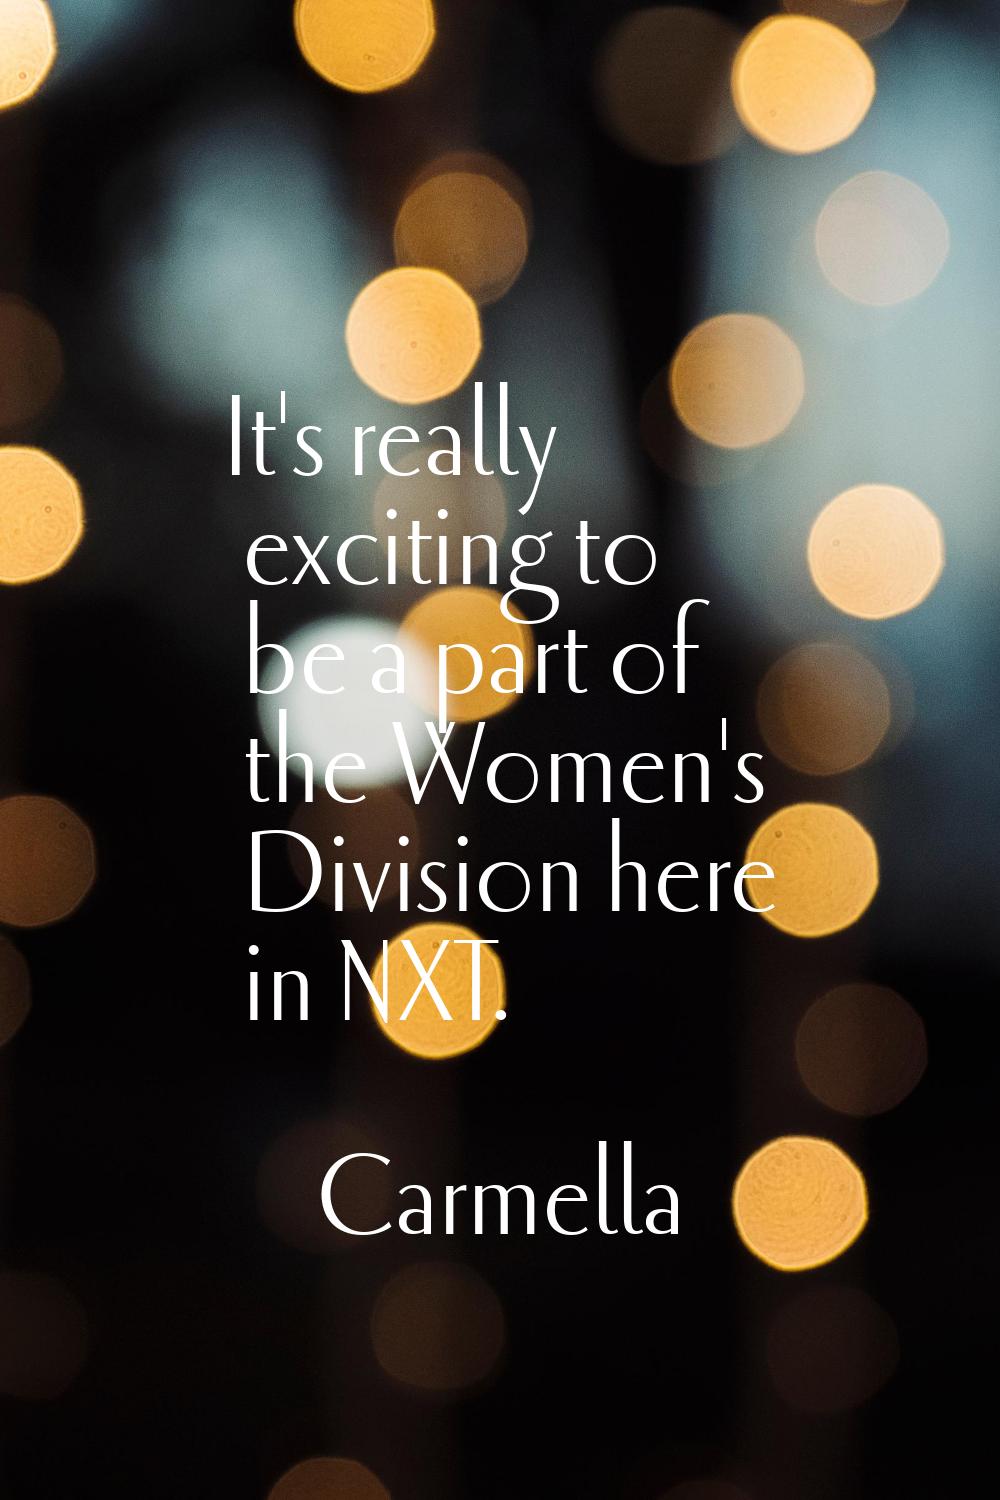 It's really exciting to be a part of the Women's Division here in NXT.